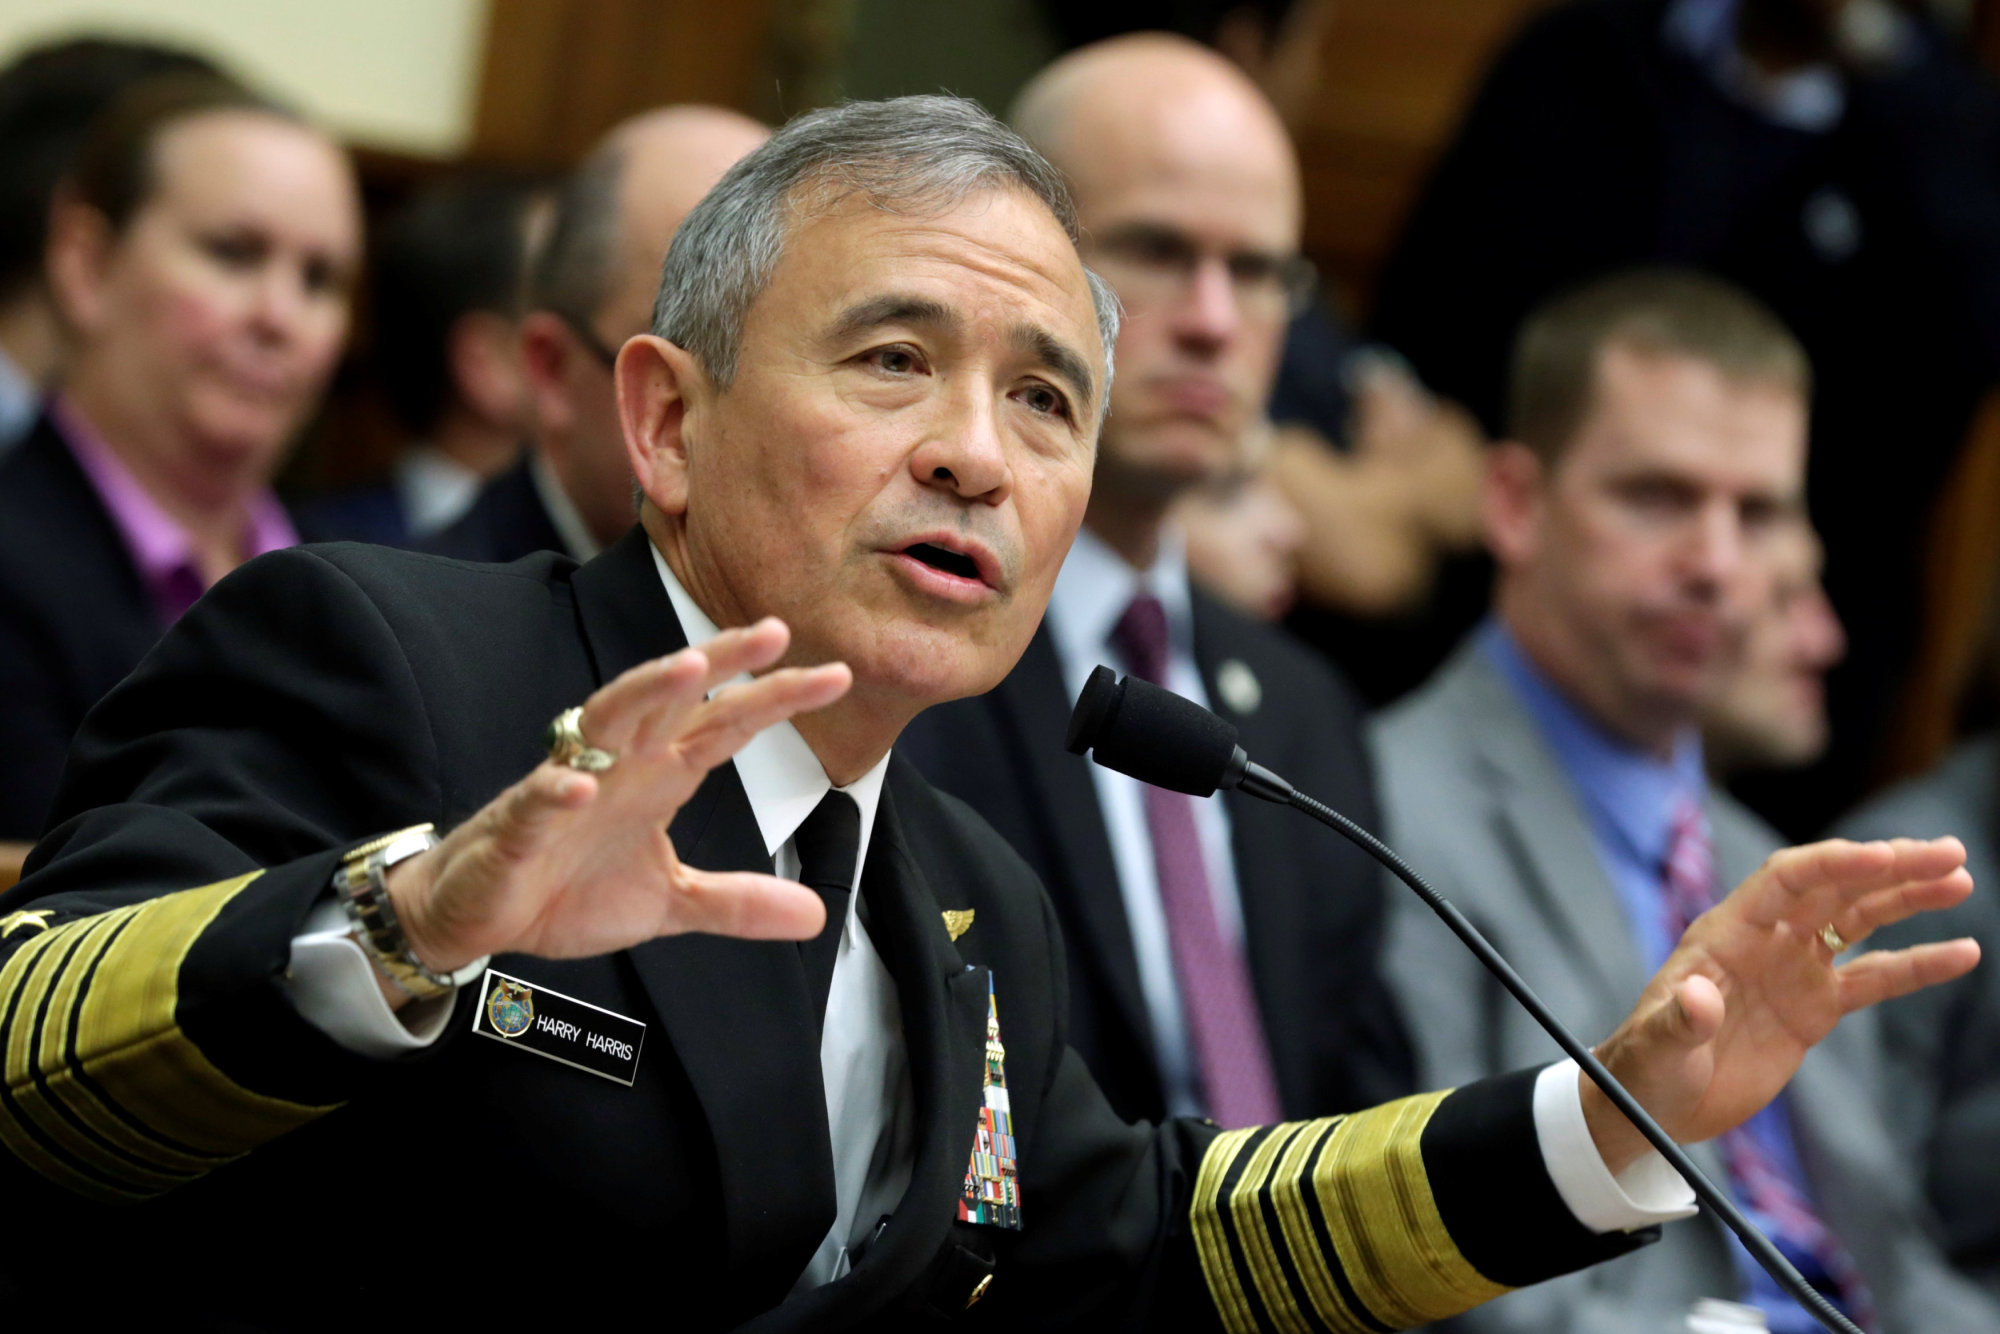 Head of  U.S. Pacific Command Adm. Harry Harris testifies before a House Armed Services Committee hearing in Washington on Wednesday. | REUTERS